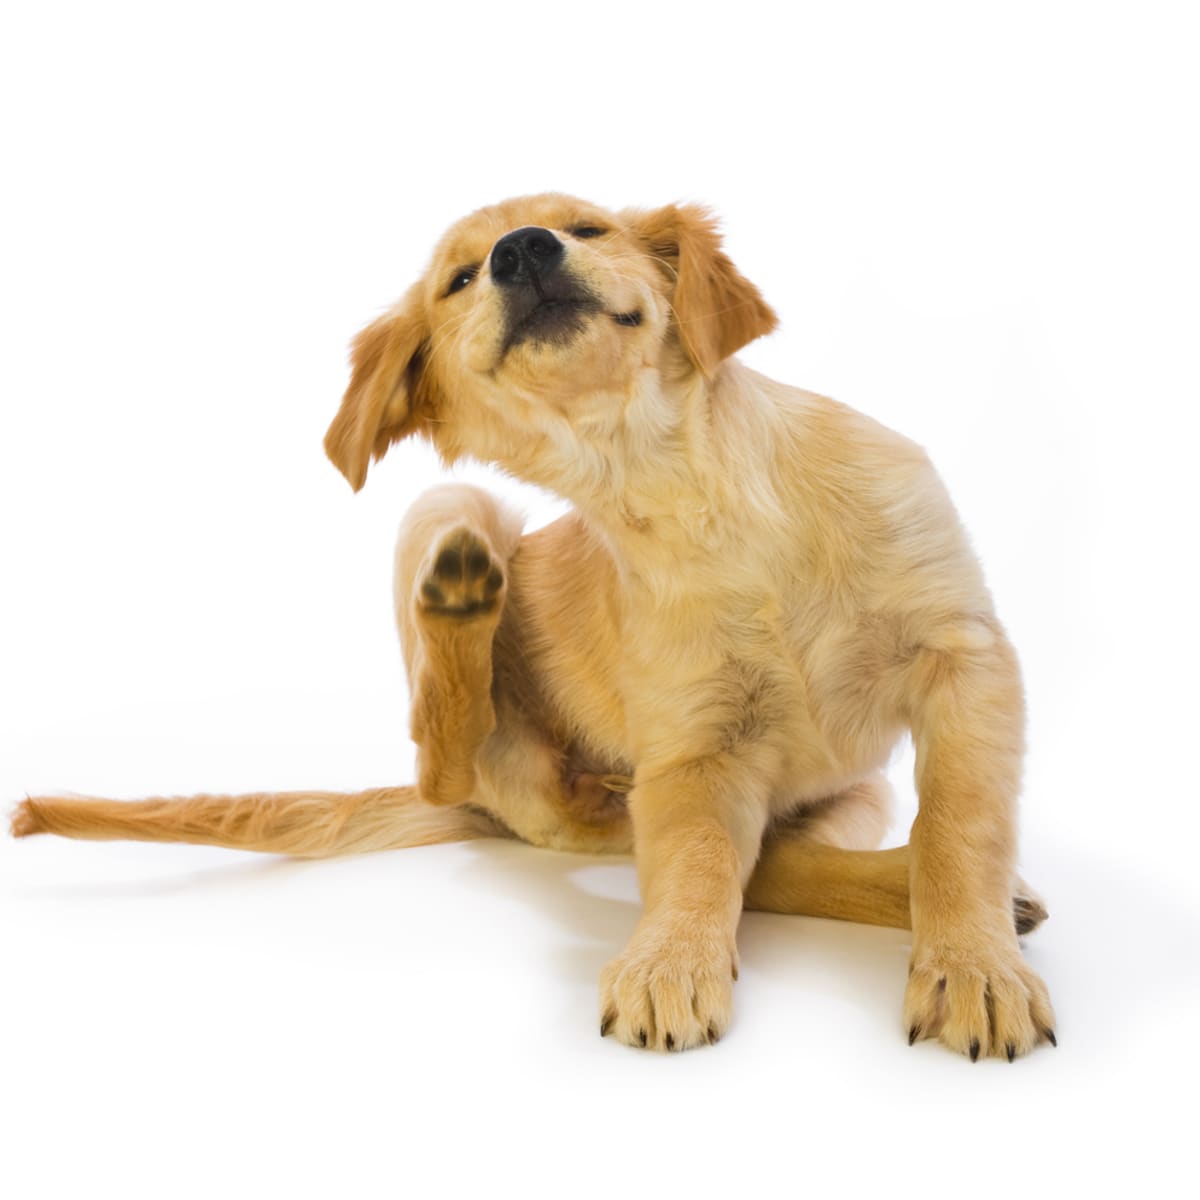 How To Get Rid Of Fleas On Dogs: Home Remedies, Prevention - Parade Pets